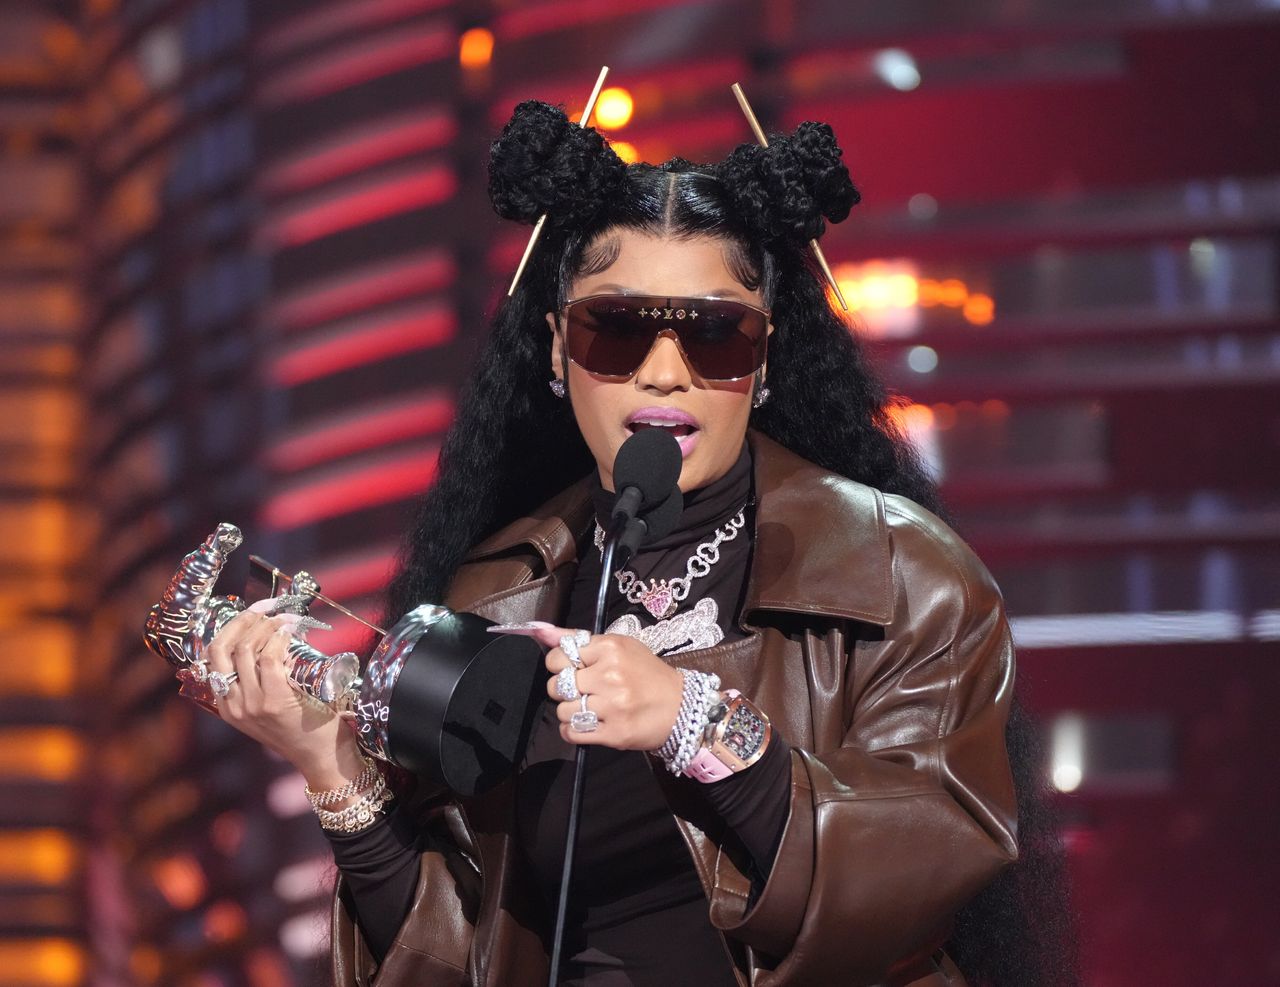 NEWARK, NEW JERSEY - SEPTEMBER 12: Nicki Minaj accepts the Best Hip Hop award for "Super Freaky Girl" onstage during the 2023 MTV Video Music Awards at Prudential Center on September 12, 2023 in Newark, New Jersey. 